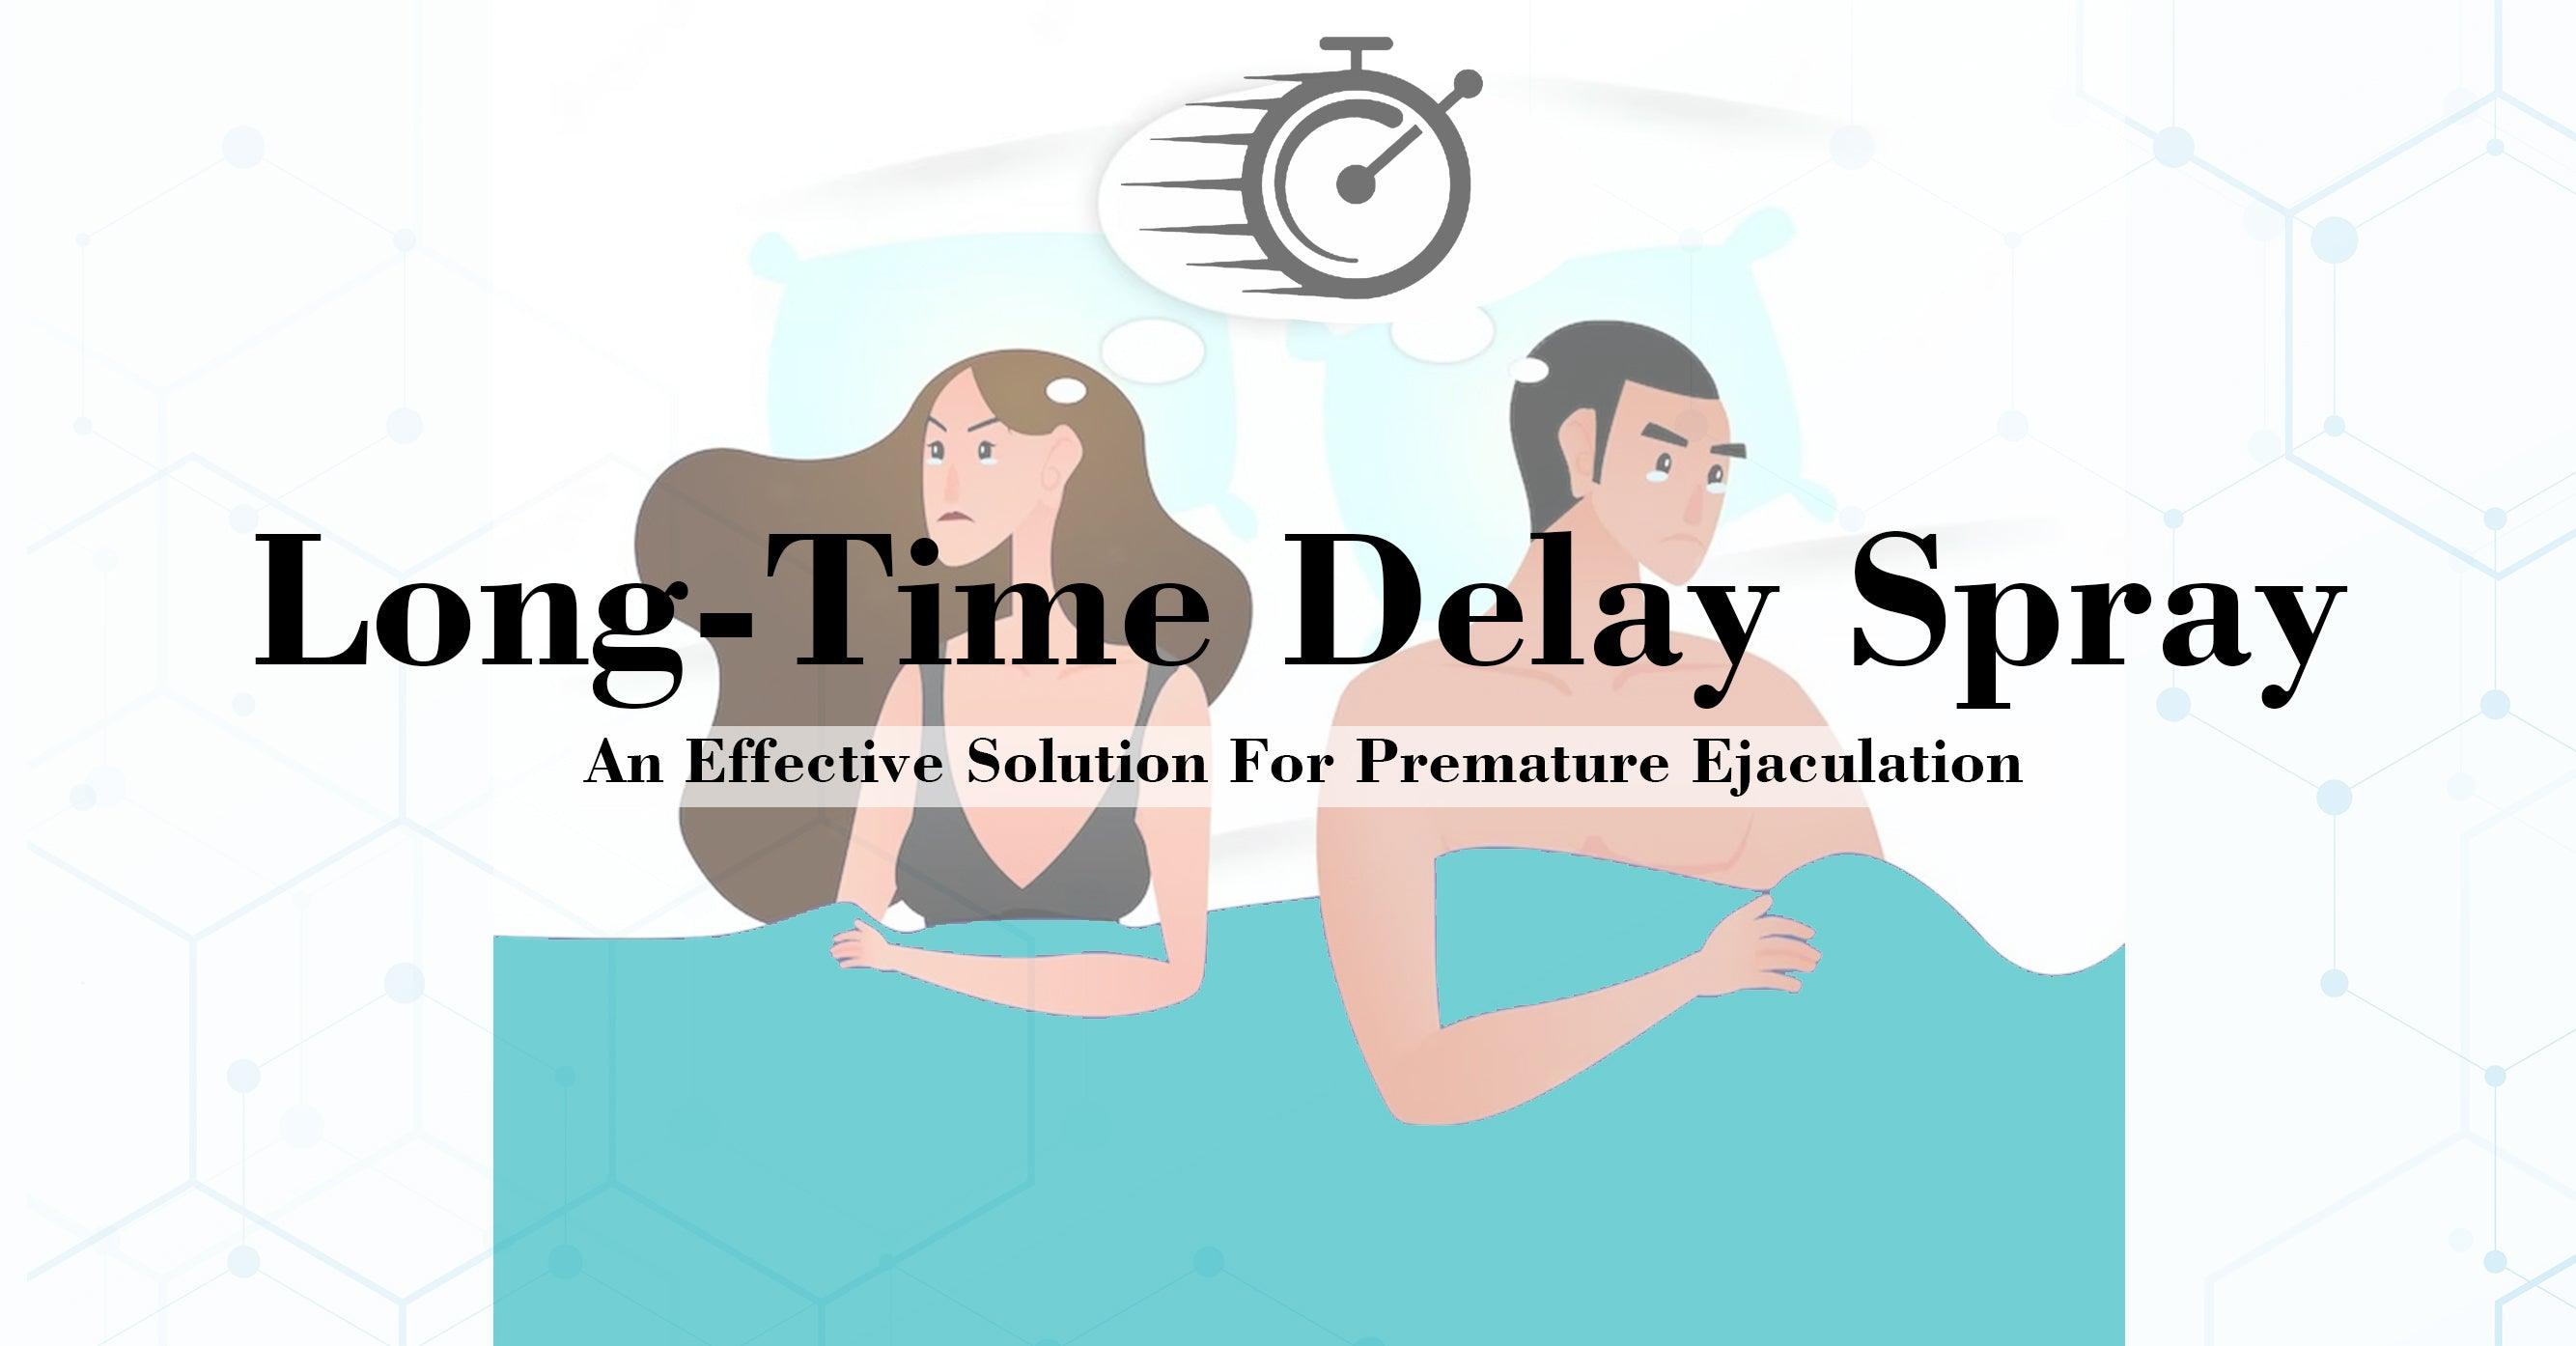 Long-Time Delay Spray - An Effective Solution for Premature Ejaculation